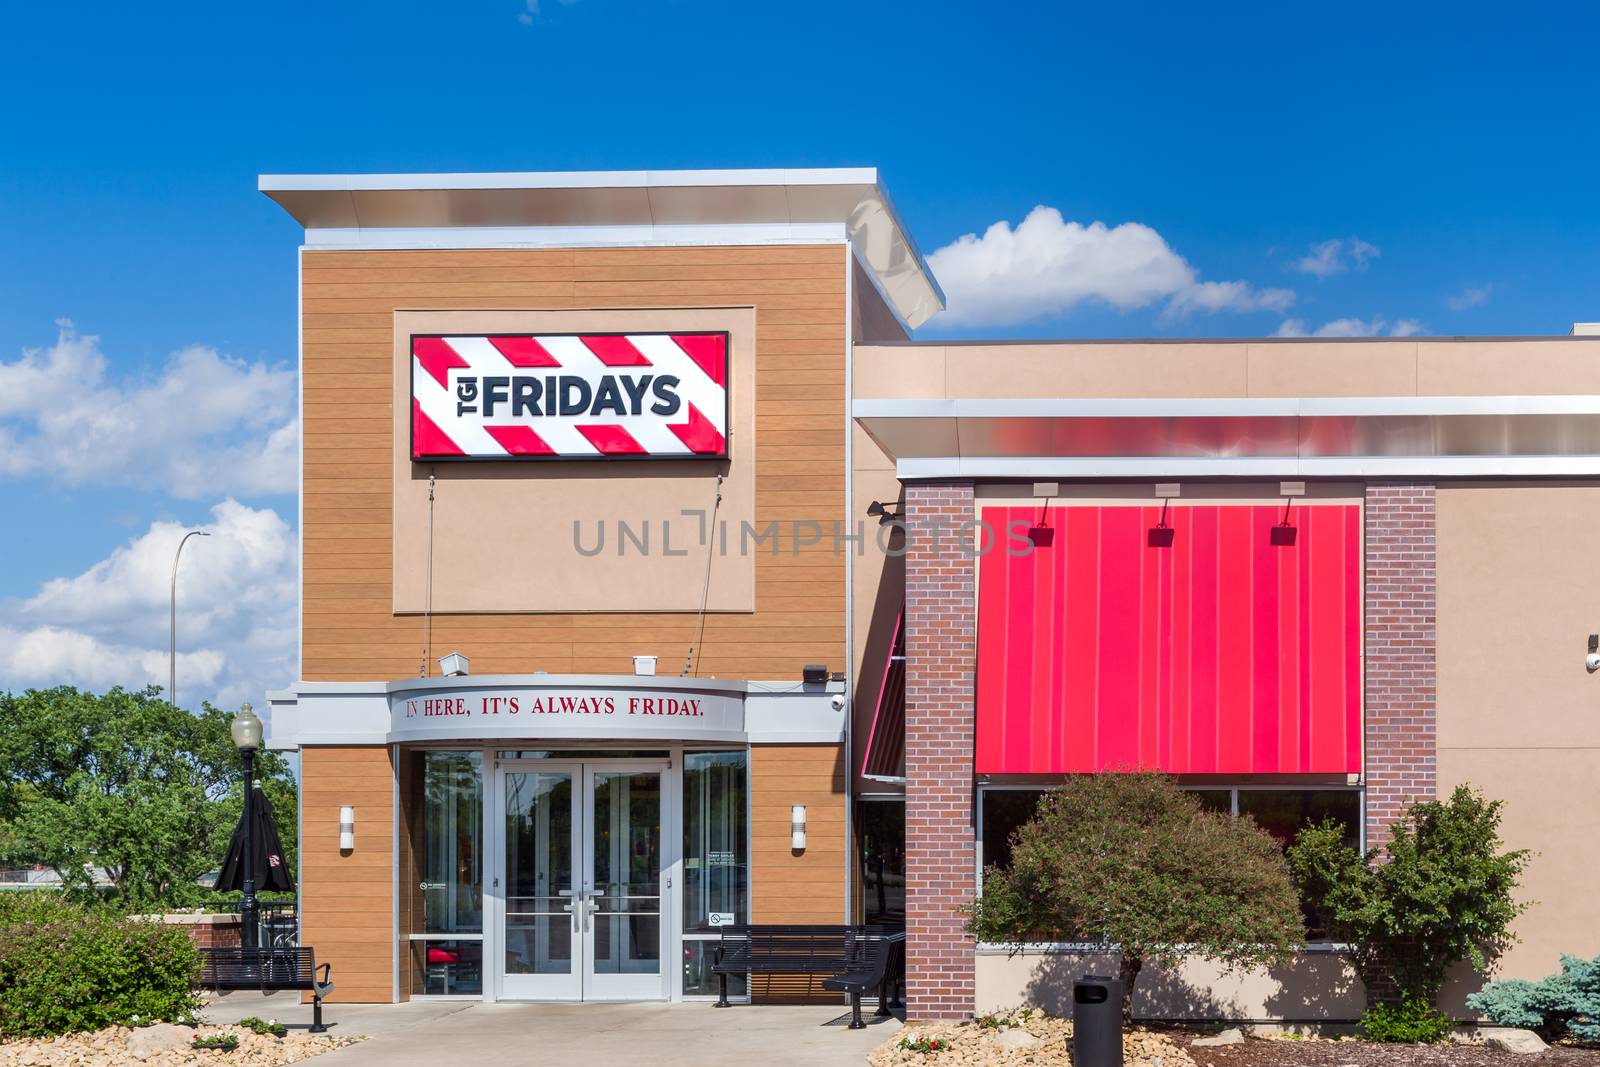 BLOOMINGTON, MN/USA - MAY 29, 2016: TGI Fridays exterior and logo. TGI Friday's is an American restaurant chain focusing on casual dining.